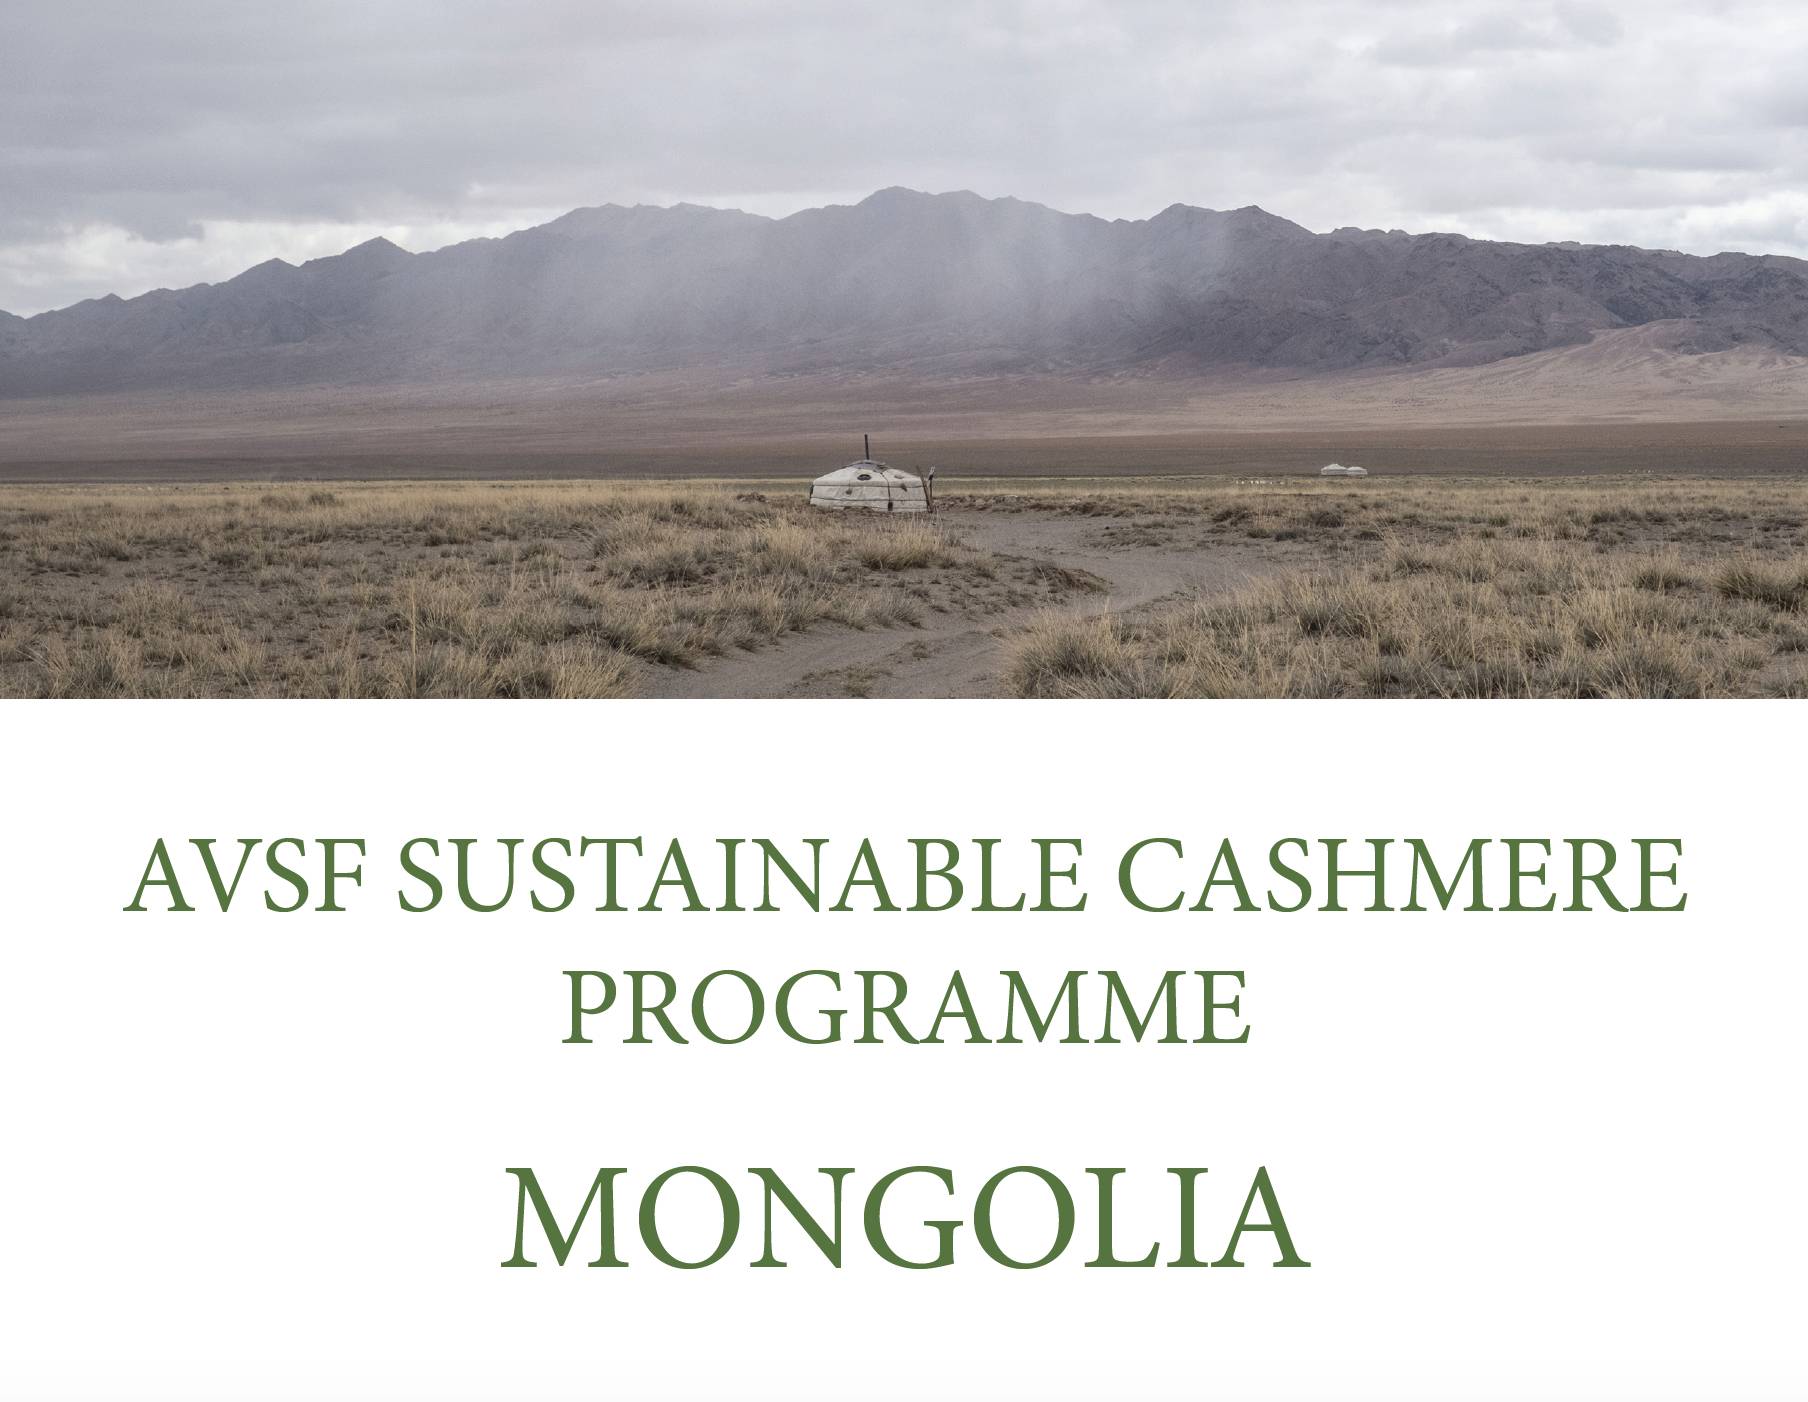 AVSF SUSTAINABLE CASHMERE PROGRAMME